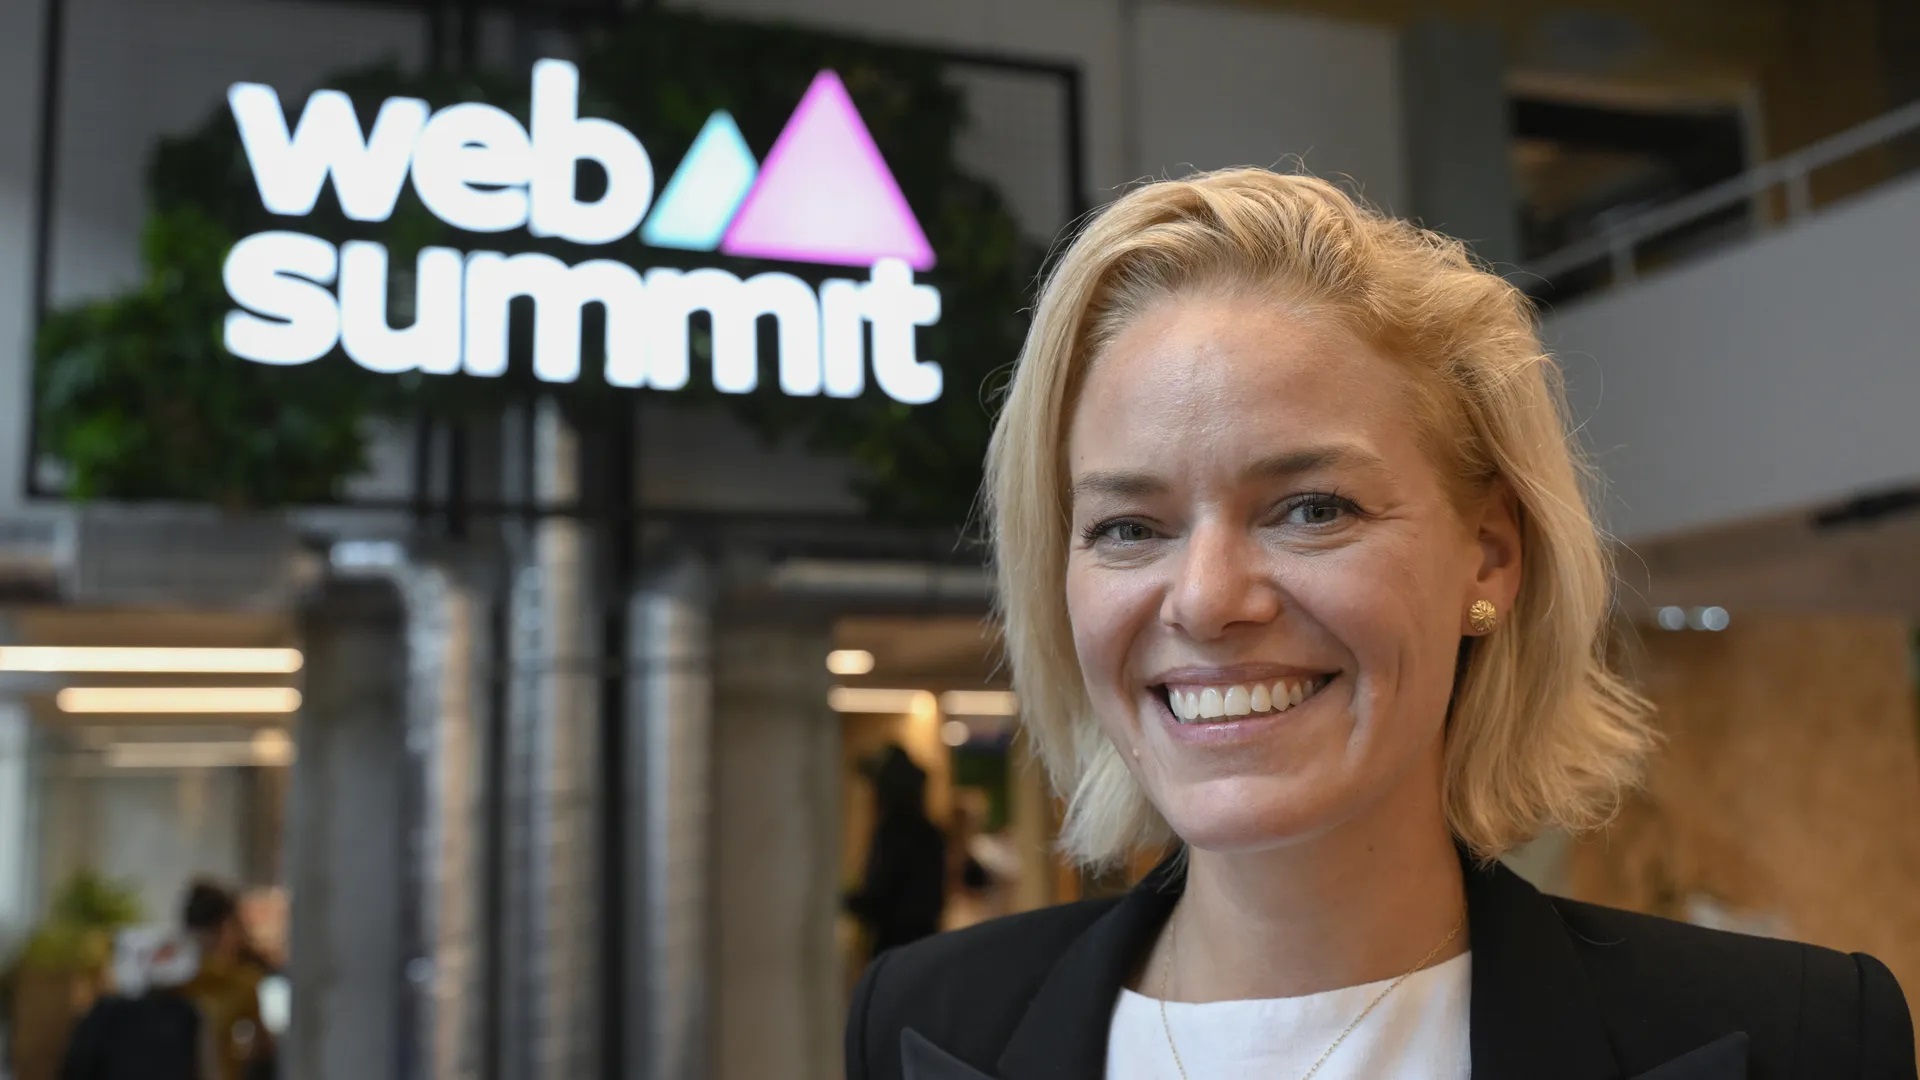 Web Summit CEO Katherine Maher Leaves To Head NPR After 3 Months